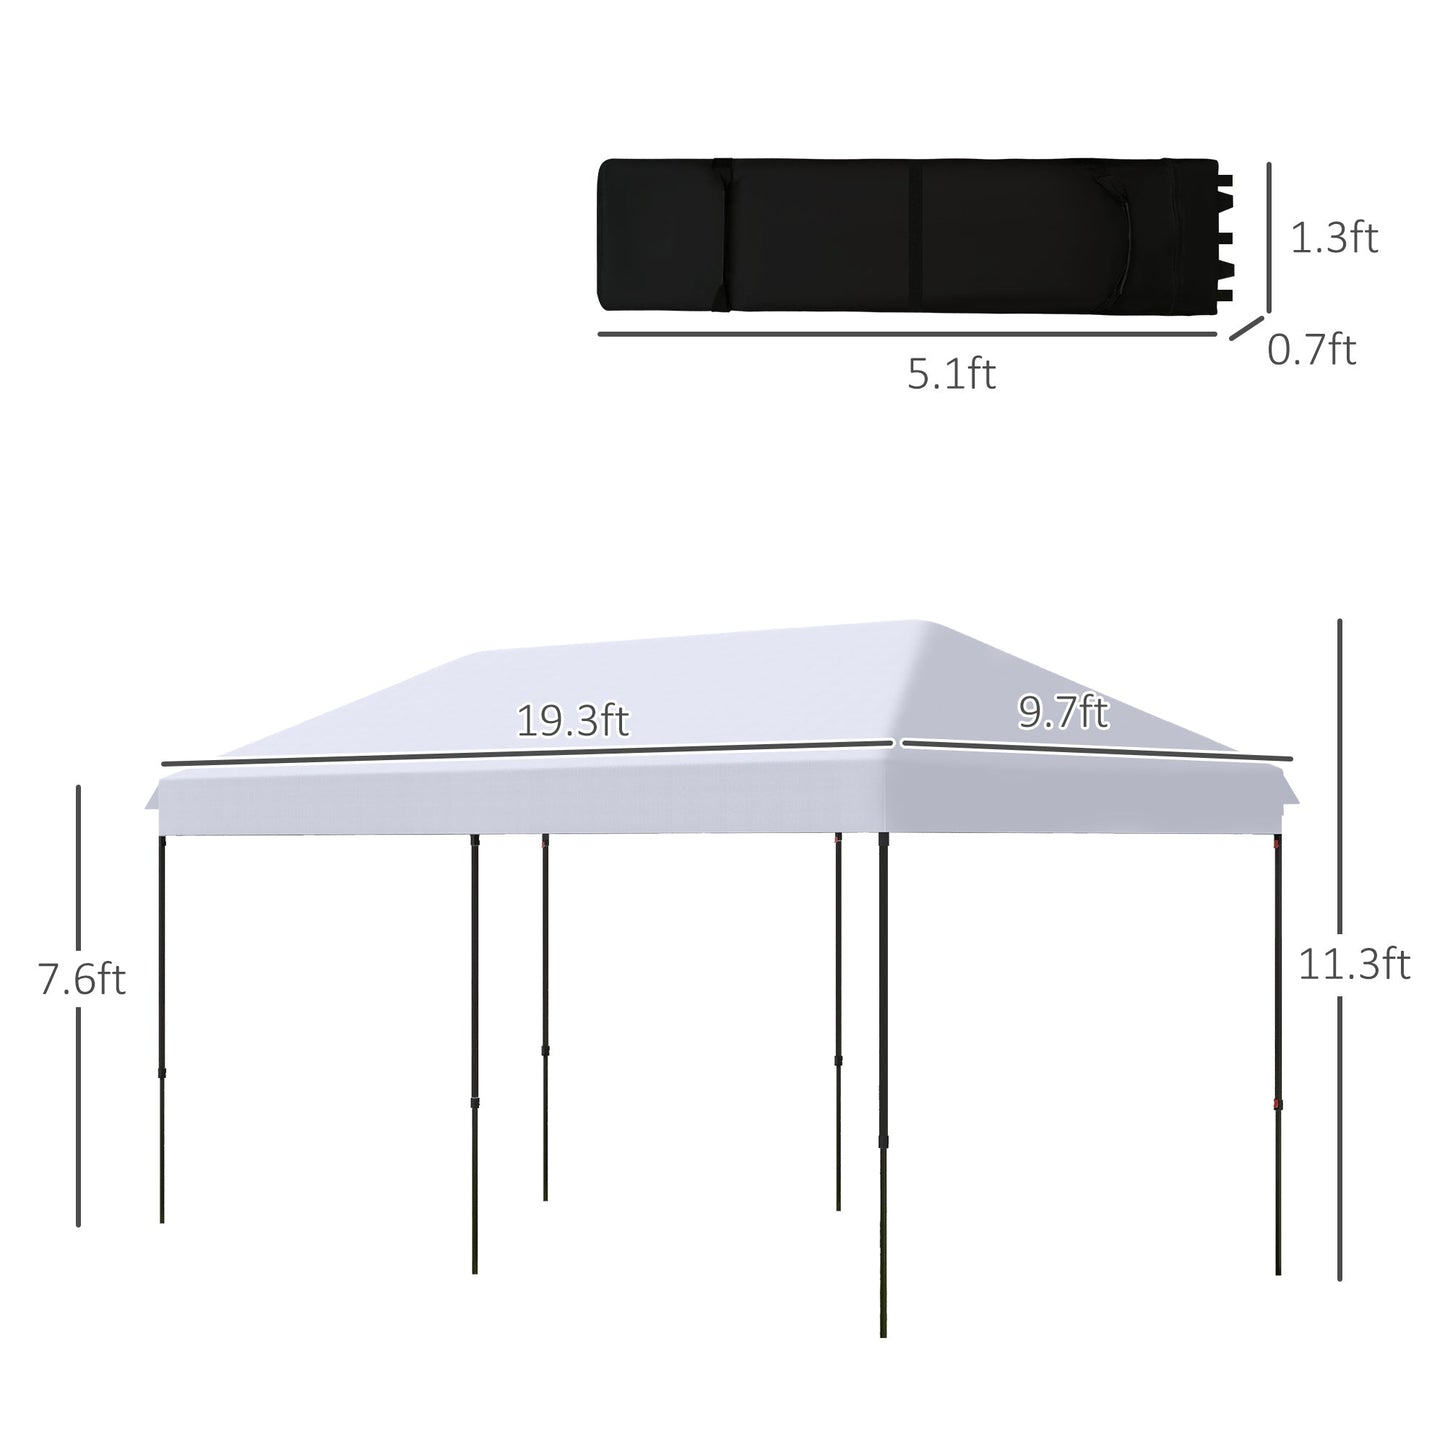 Miscellaneous-10' x 20' Heavy Duty Pop Up Canopy Tent with 3-Level Adjustable Height, Wheeled Roller Bag, UV Fighting Roof, White - Outdoor Style Company